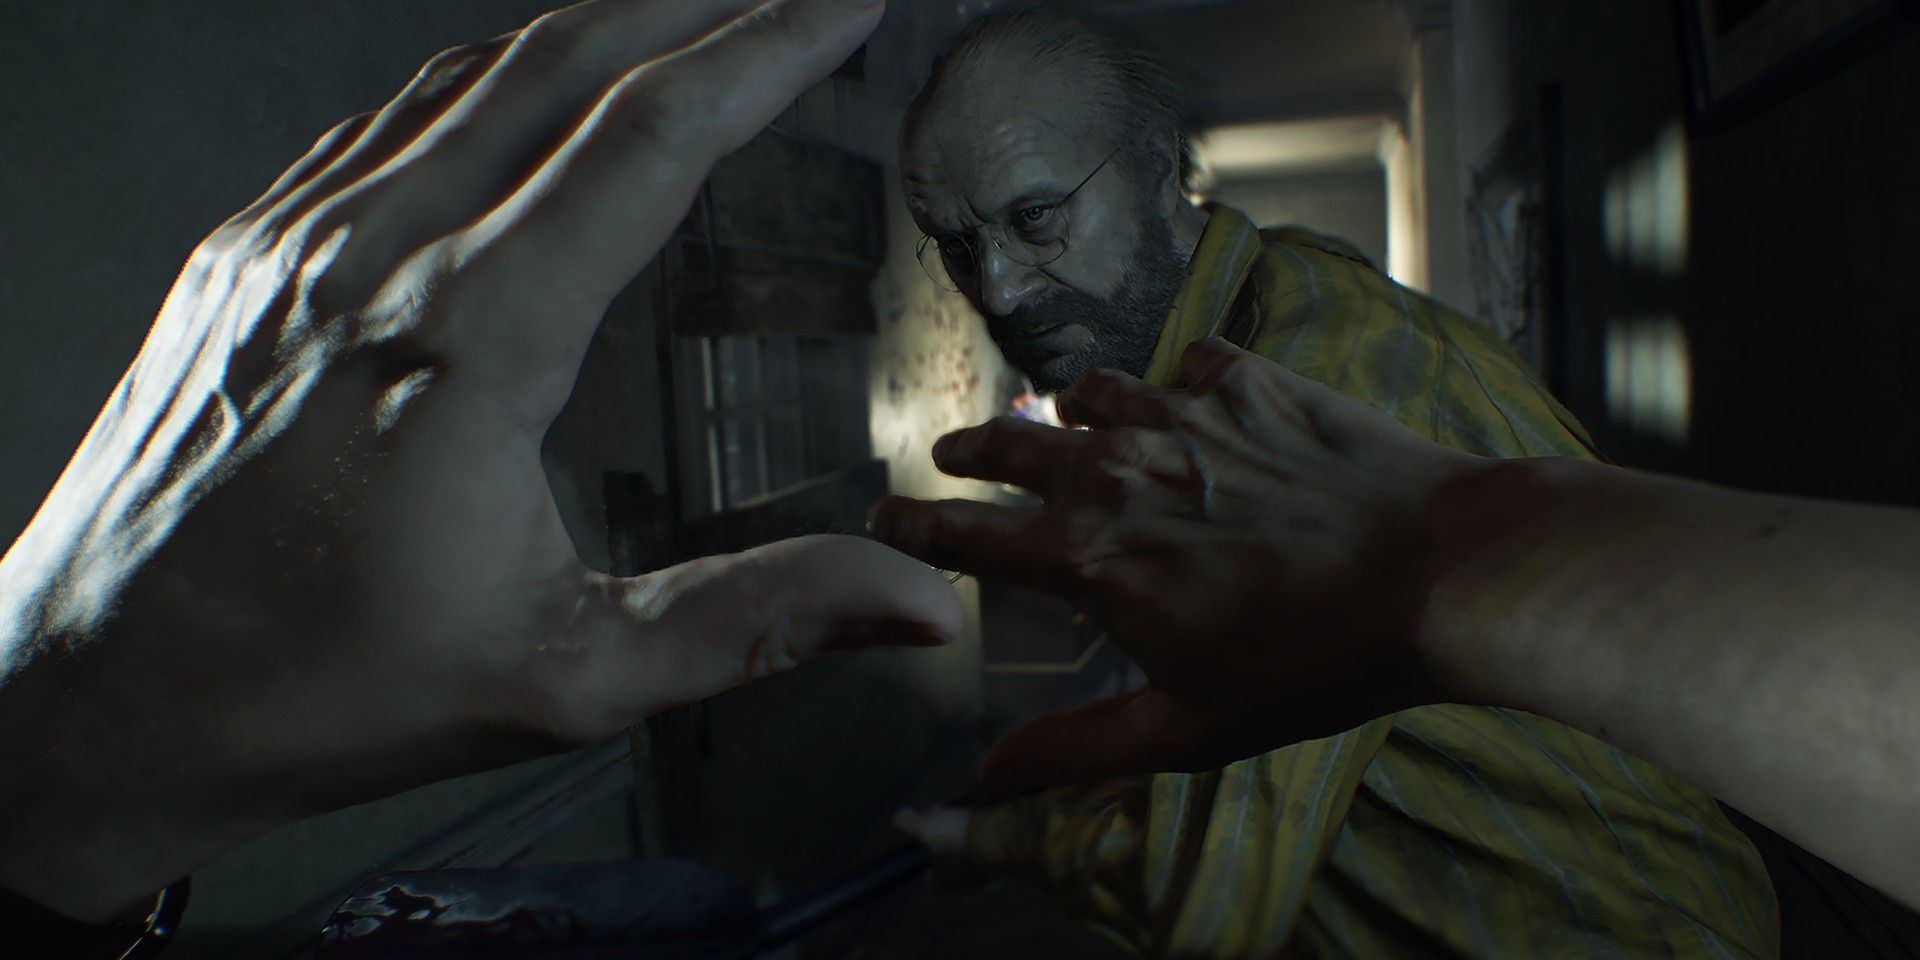 Ethan being attacked by Jack in Resident Evil 7